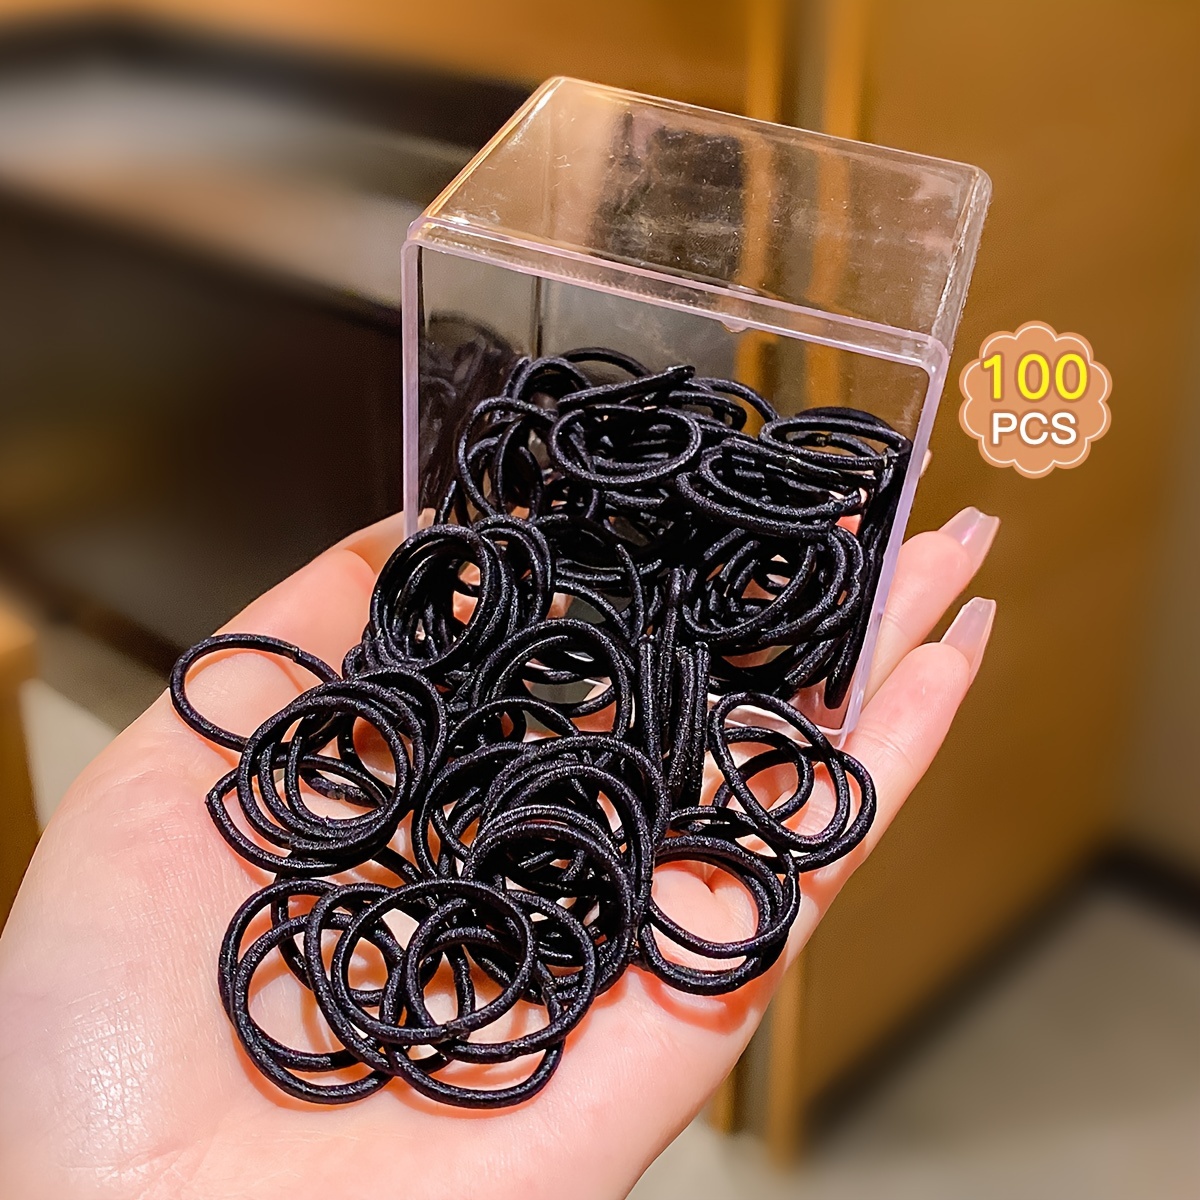 3/4 Inches Black Hair Rubber Bands for Hair Ties Small Elastics Bands Large  Hair Braiding Ponytail Holders for Baby Toddler Girls Infants Kids Thick  Hair Mini Black Rubber bands No Damage for